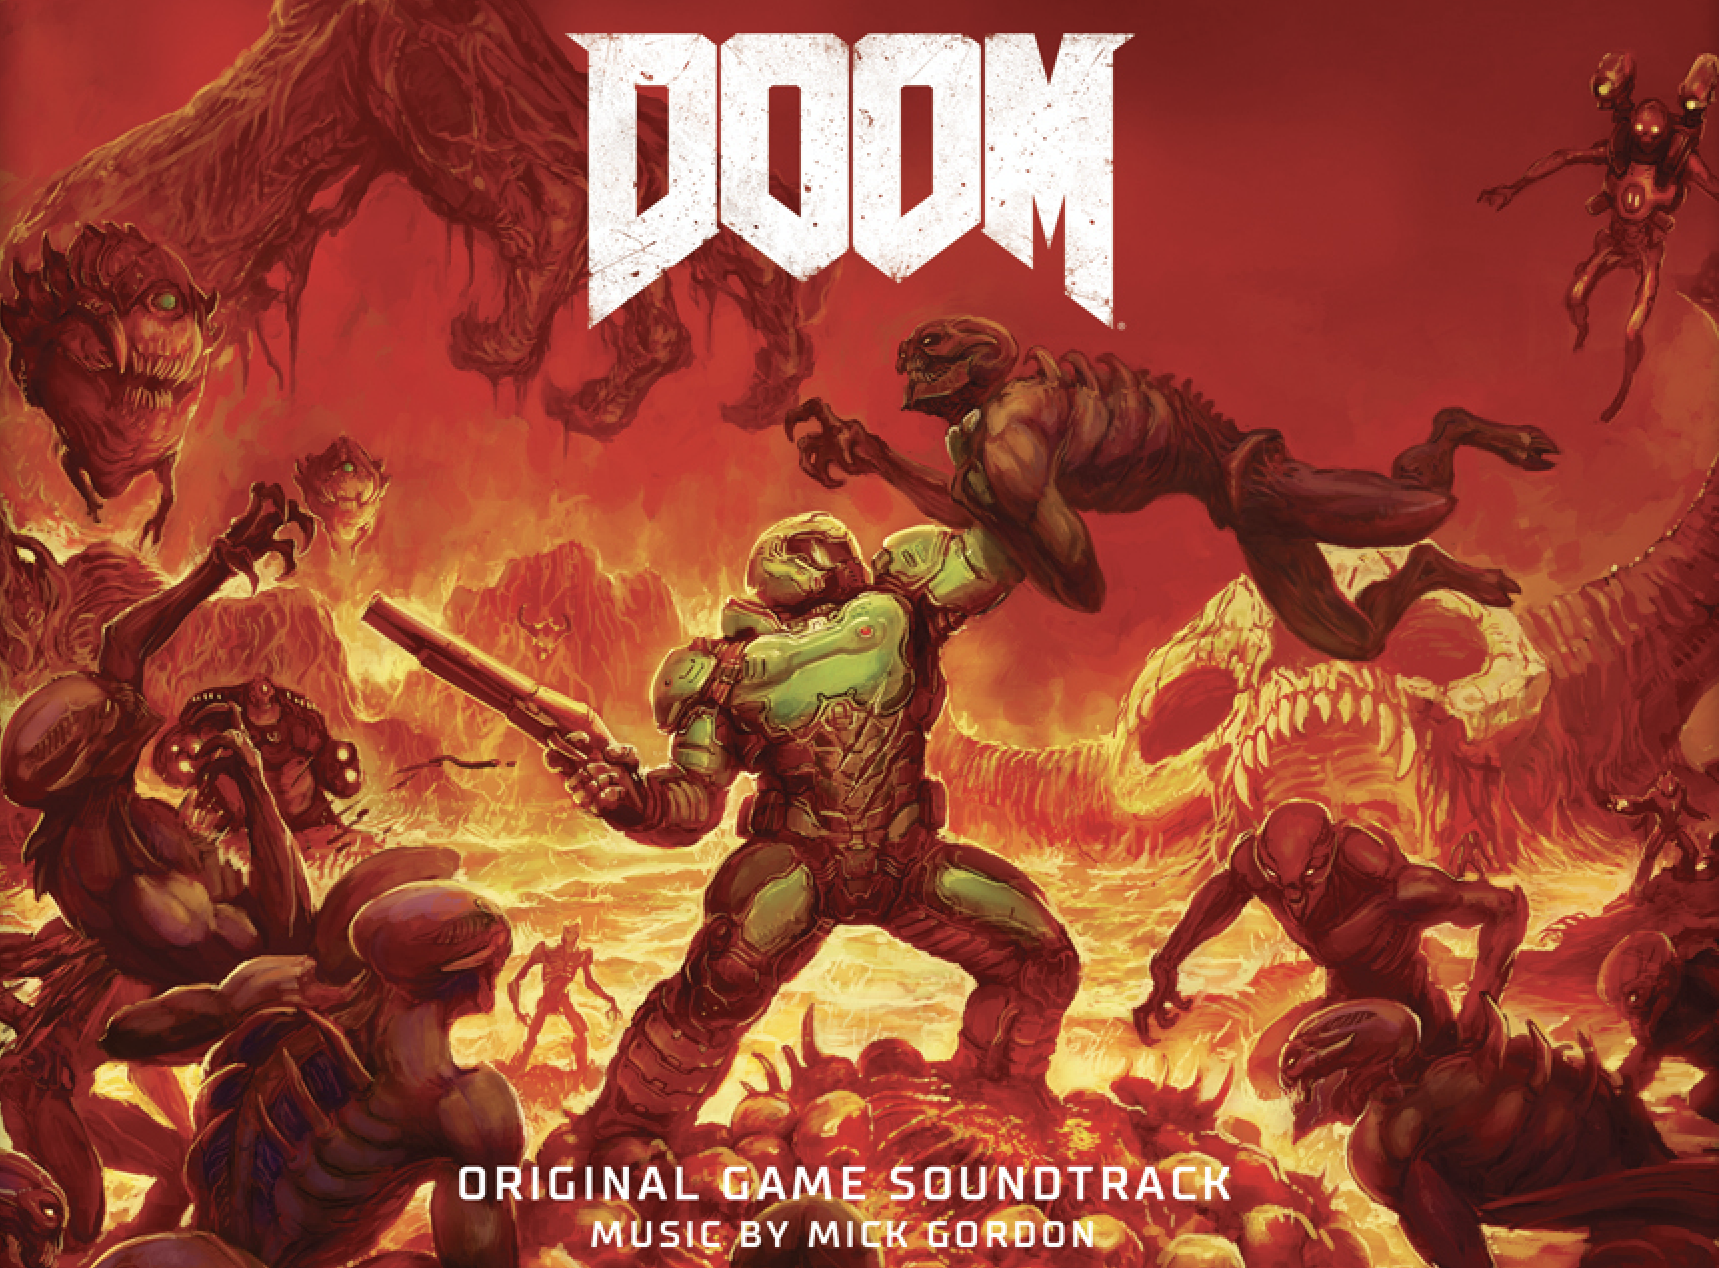 games with metal soundtracks